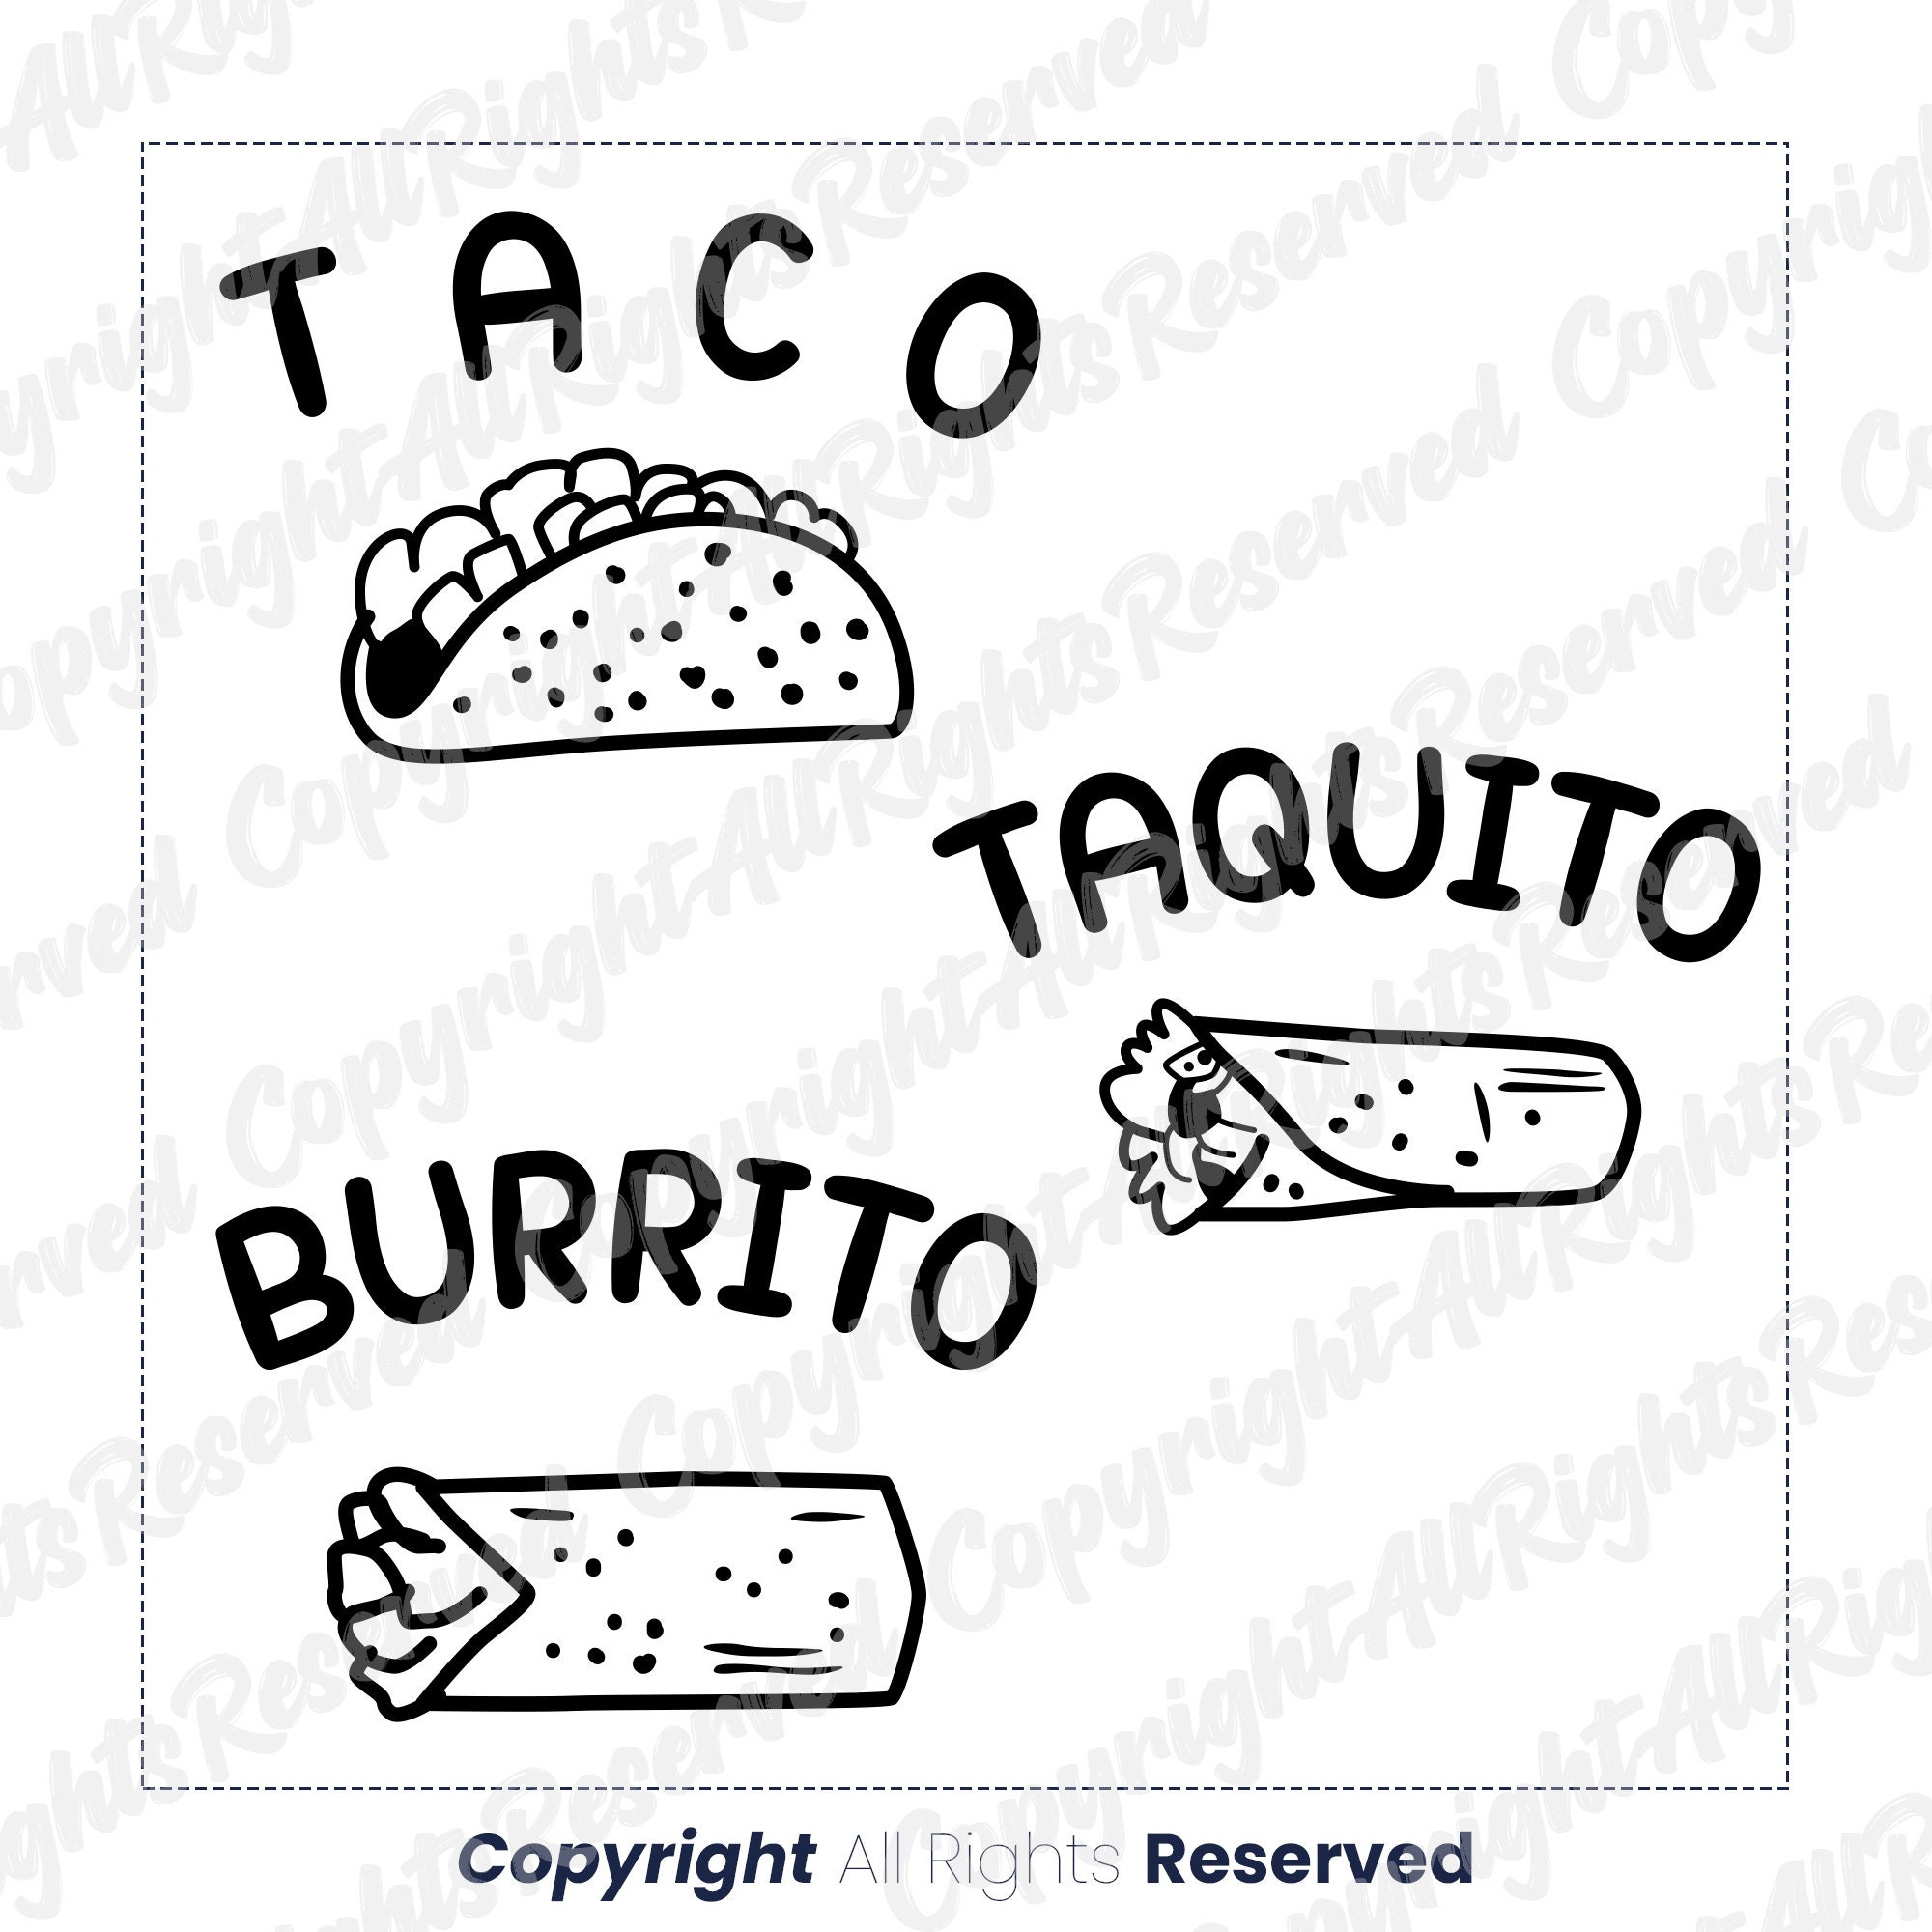 Taco sketch by lhfgraphics Vectors  Illustrations with Unlimited Downloads   Yayimages